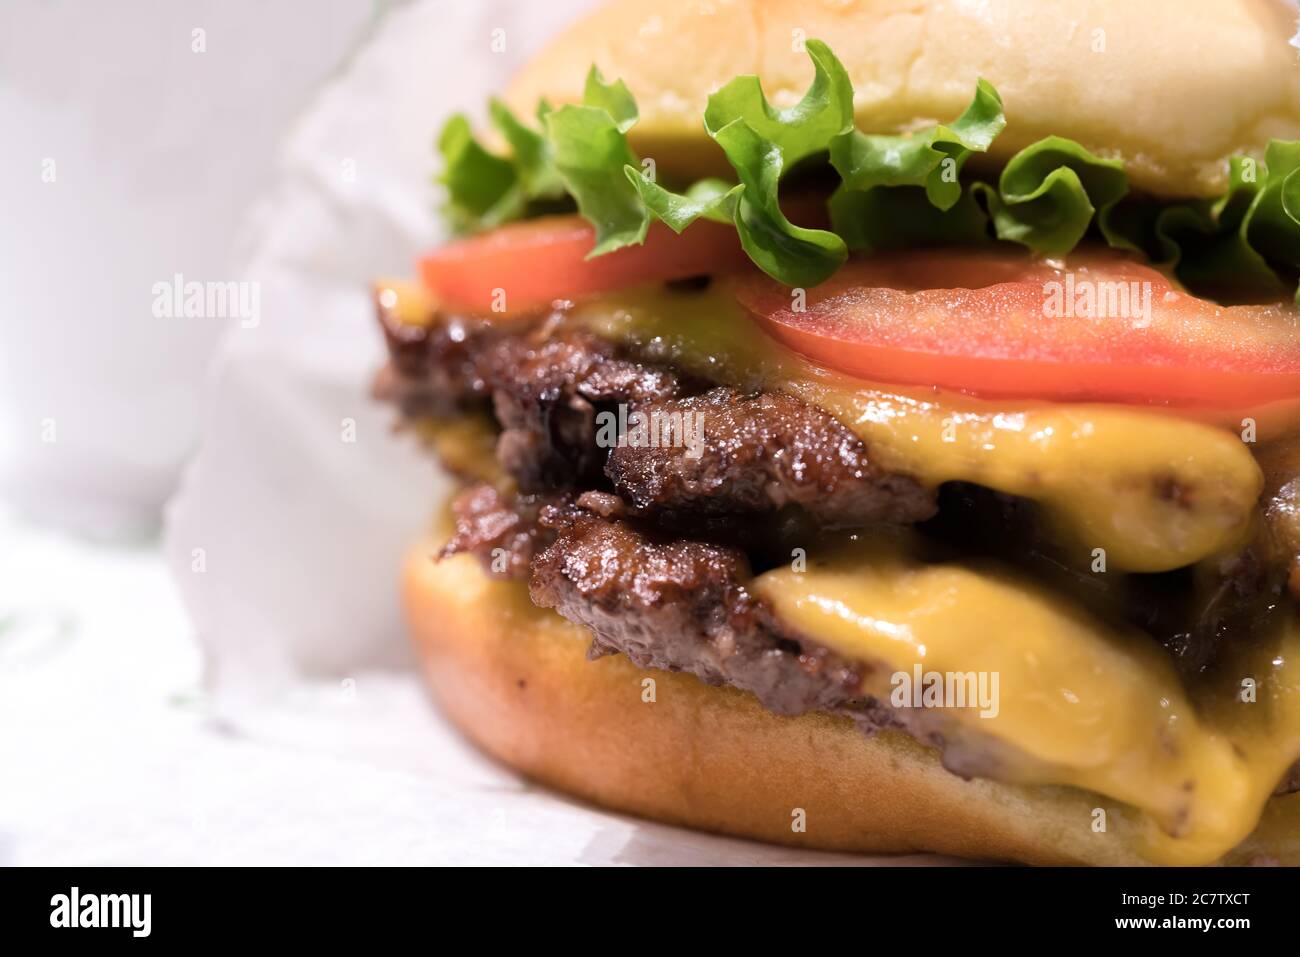 Double cheeseburger with tomato lettuce and onion, Cheese Fries and Milkshake. Stock Photo